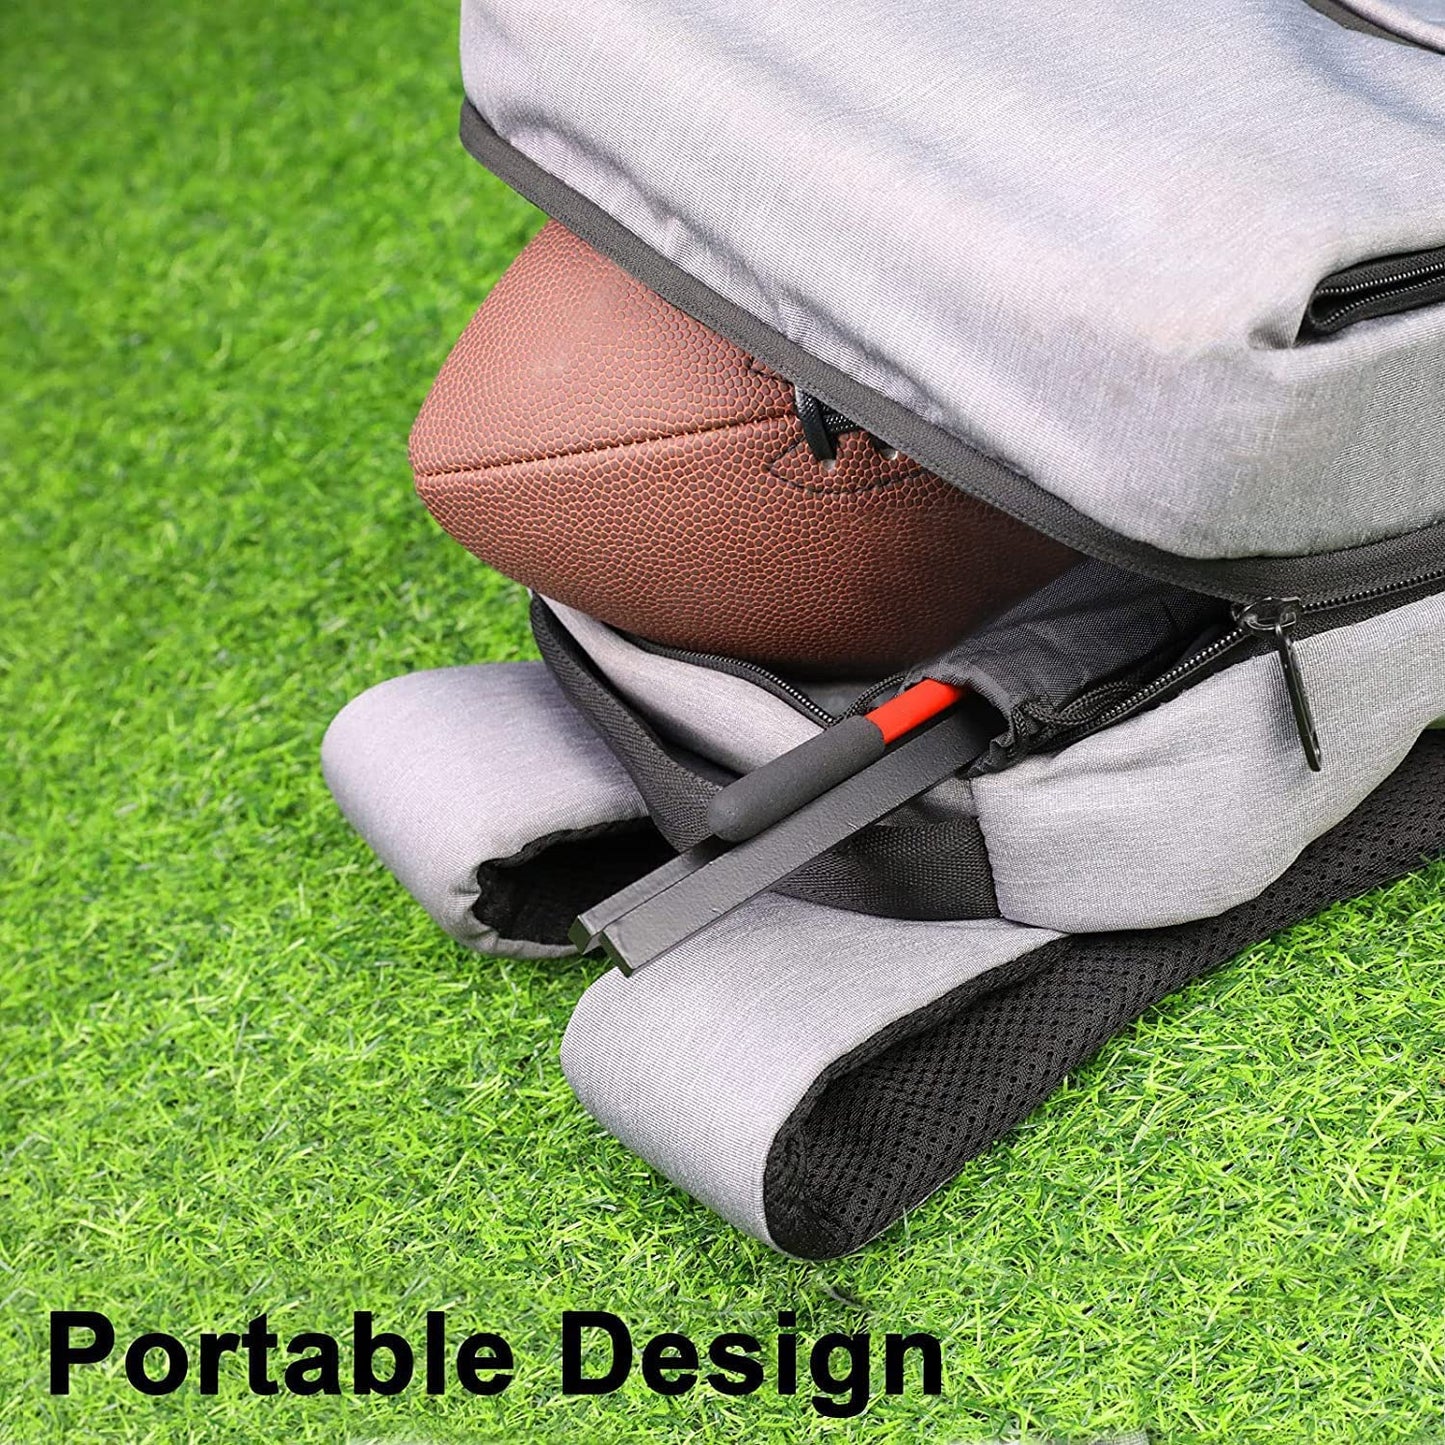 Uprimu Foot Holder Tee for Field Goal Training, Heavy Steel Made, Compatible with All Football Sizes